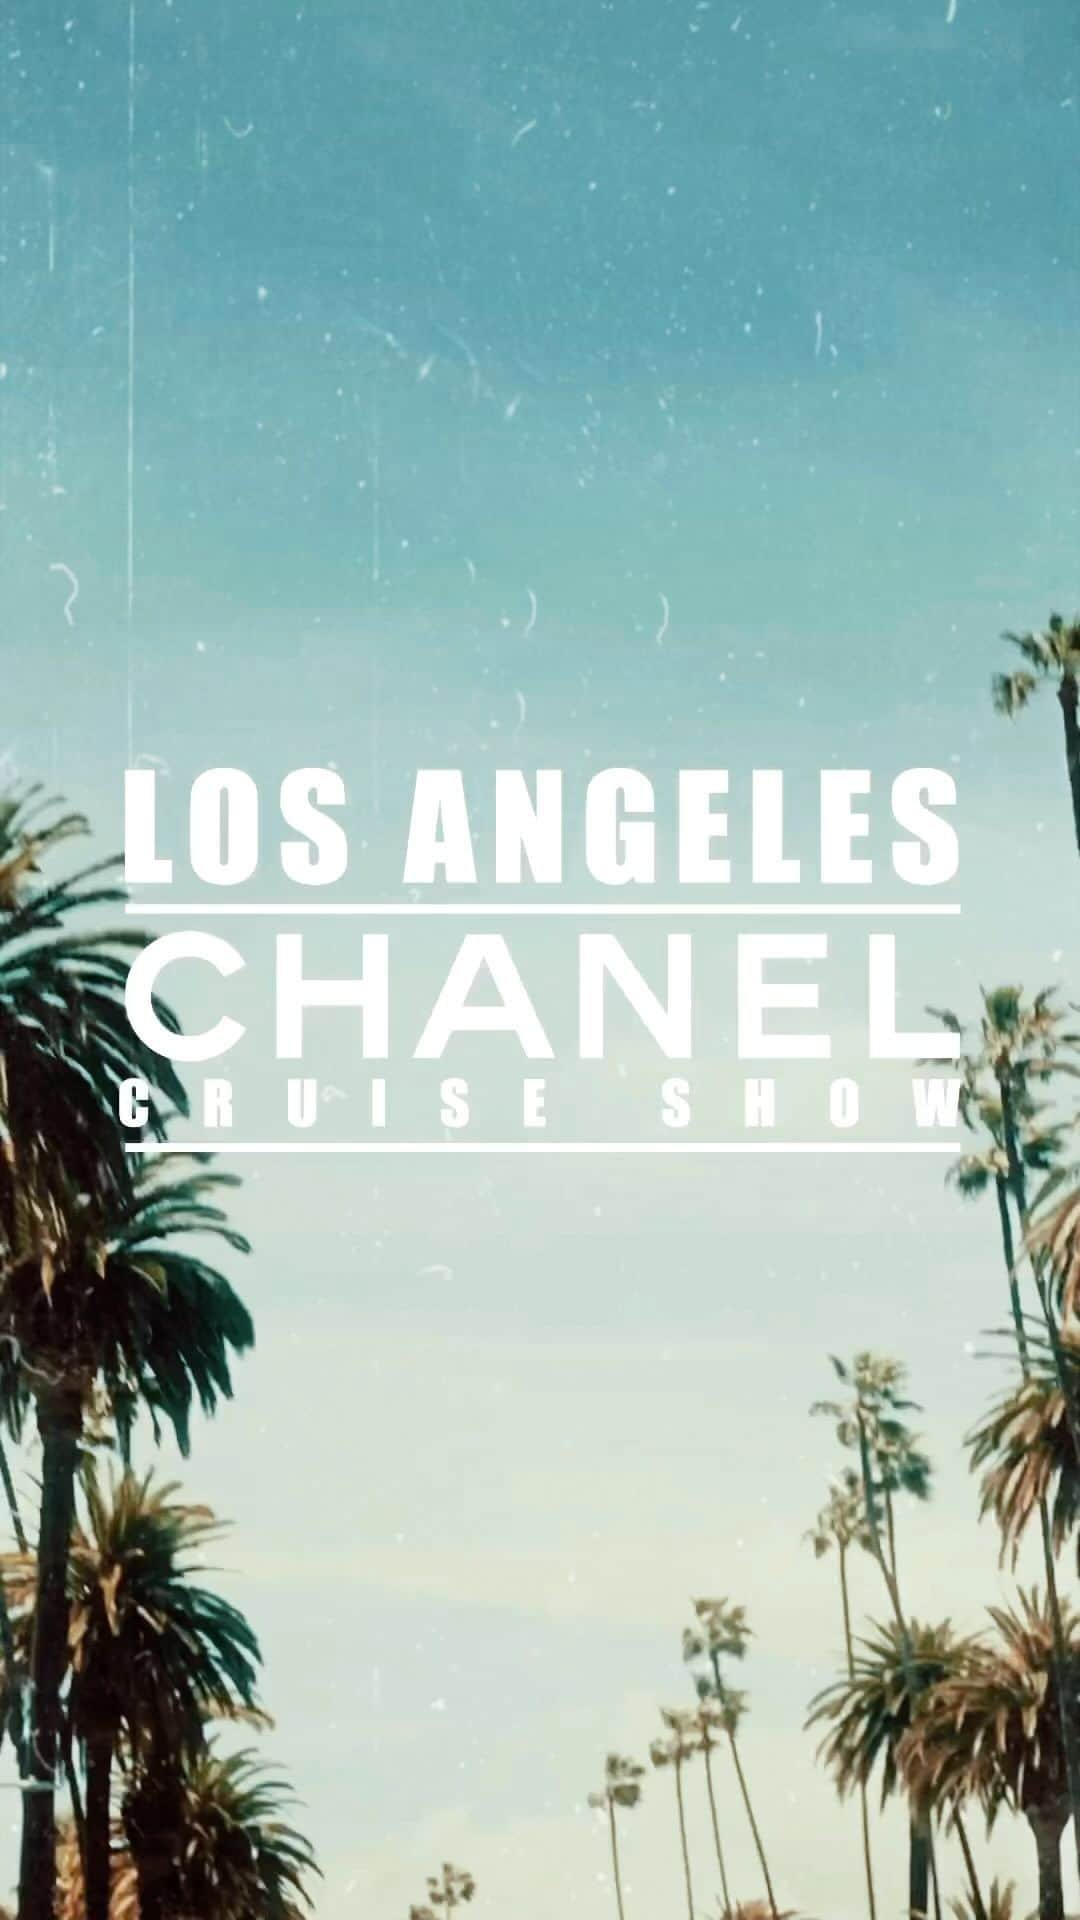 G-DRAGONのインスタグラム：「#AD #CHANEL #CHANELCruise202324  Lost in music – ambassadors and friends of the House Nile Rodgers, Caroline de Maigret, G-Dragon, Sébastien Tellier, Kristen Stewart, Margaret Qualley and Margot Robbie gathered in Los Angeles on the occasion of the CHANEL Cruise 2023/24 show, which was concluded by a performance by Snoop Dogg.  Directed by Caroline de Maigret.  See more at chanel.com  @NileRodgers @CarolineDeMaigret @Xxxibgdrgn @SebastienTellier @Ozifp @IamHalsey @Anderson._Paak @TraceeEllisRoss #KristenStewart @RileyKeough #MargaretQualley #MargotRobbie @SnoopDogg @AnokYai @MariamdeVinzelle @Yye_riqun @AbbyChampion @AliceCharvet01 @Felicenova @chanelofficial」